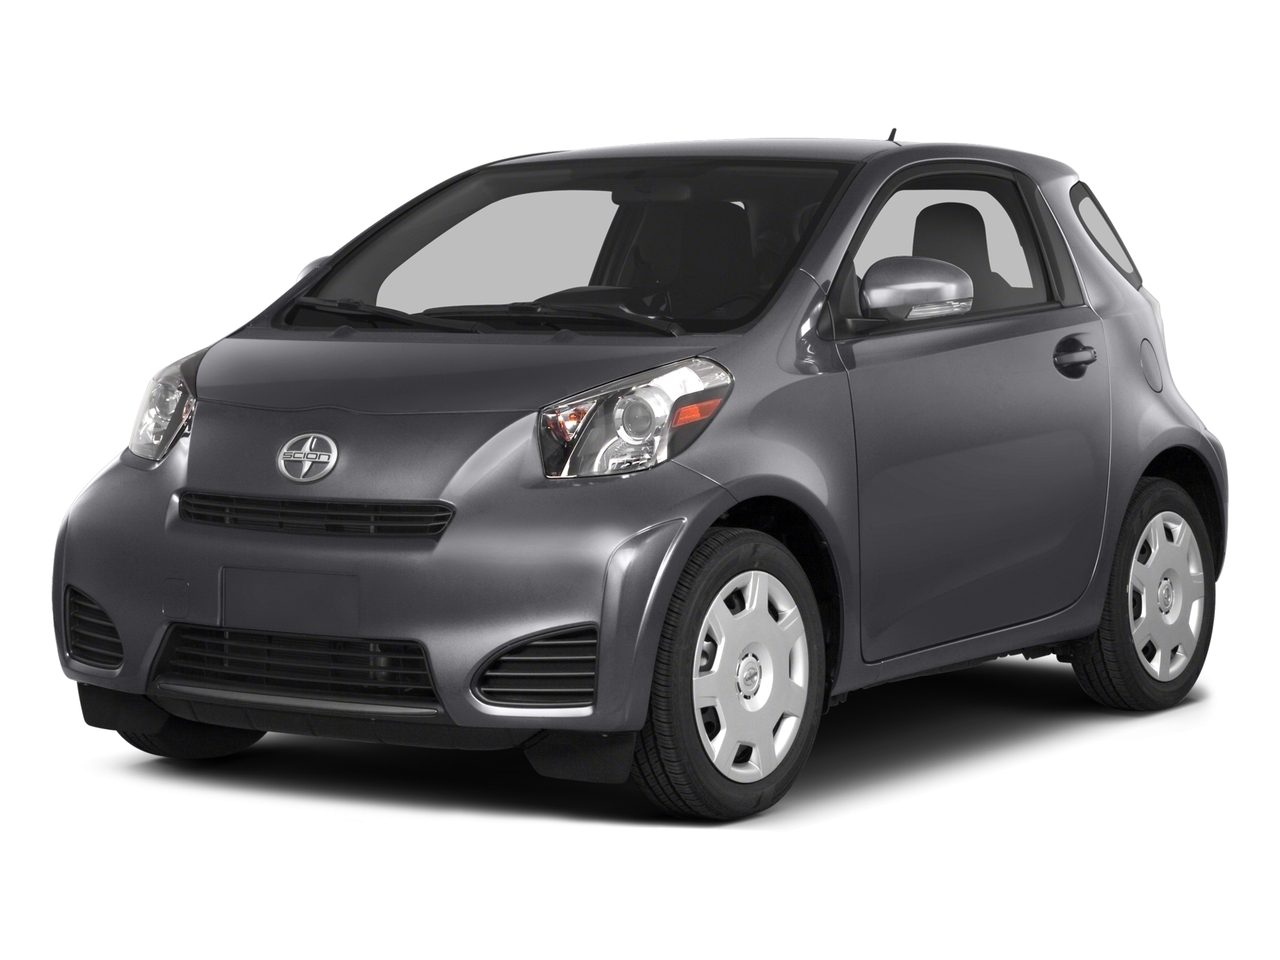 Toyota Scion IQ Price & Launch Details Out